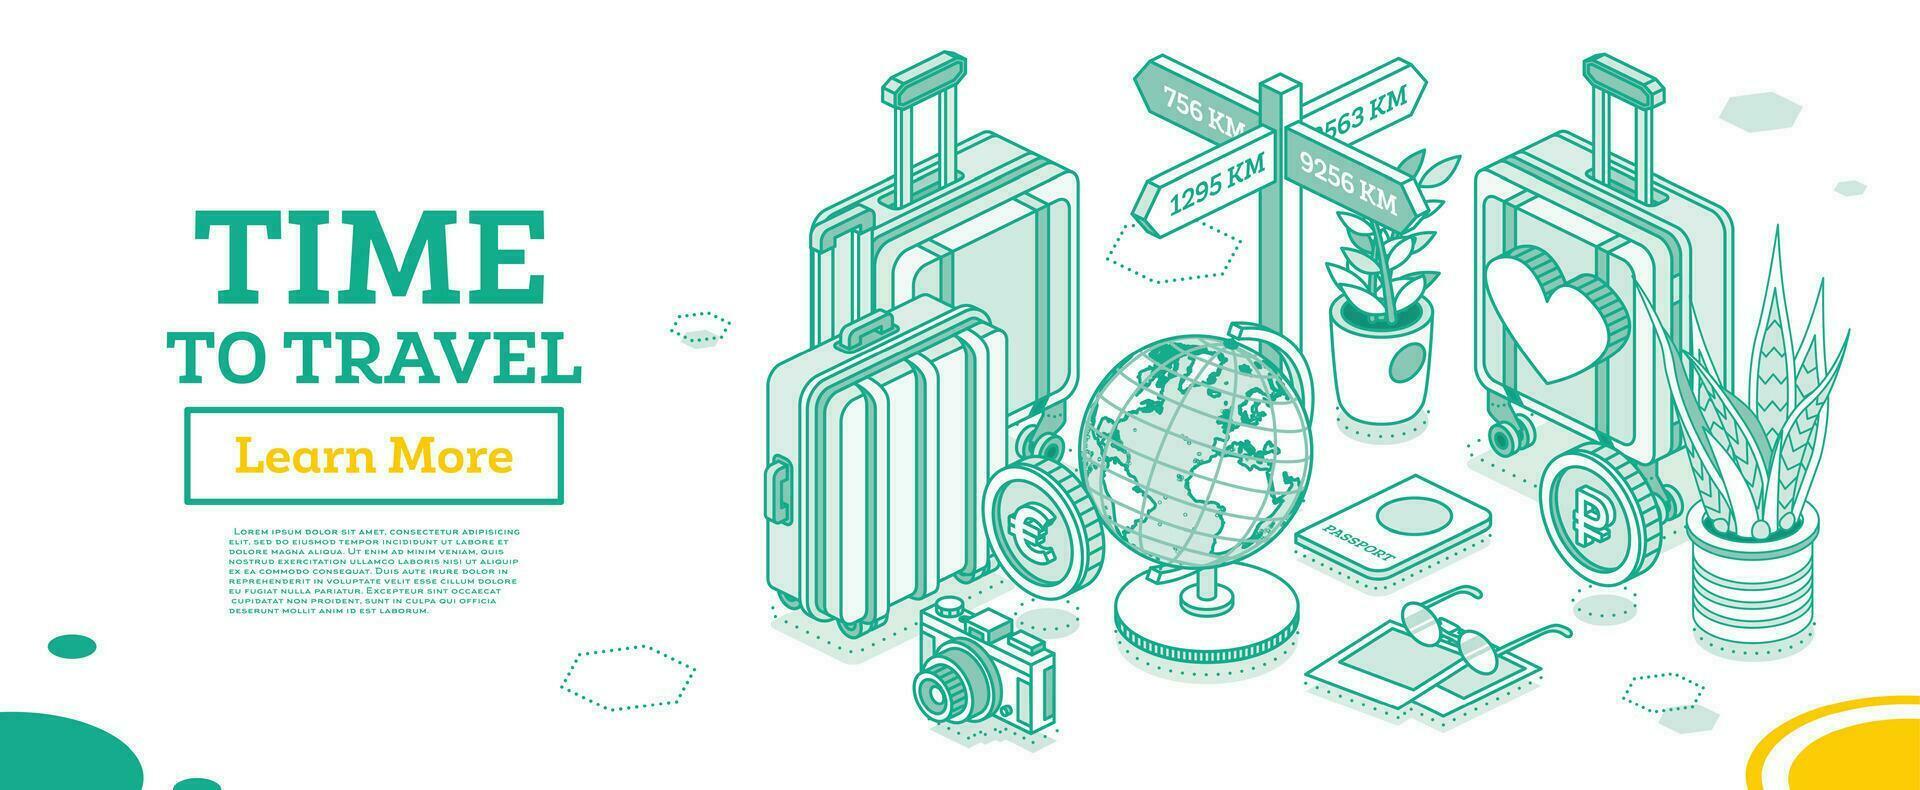 Time to travel. Isometric outline touristic concept. Travel bags, suitcases, passport, foto camera, globe and money. vector